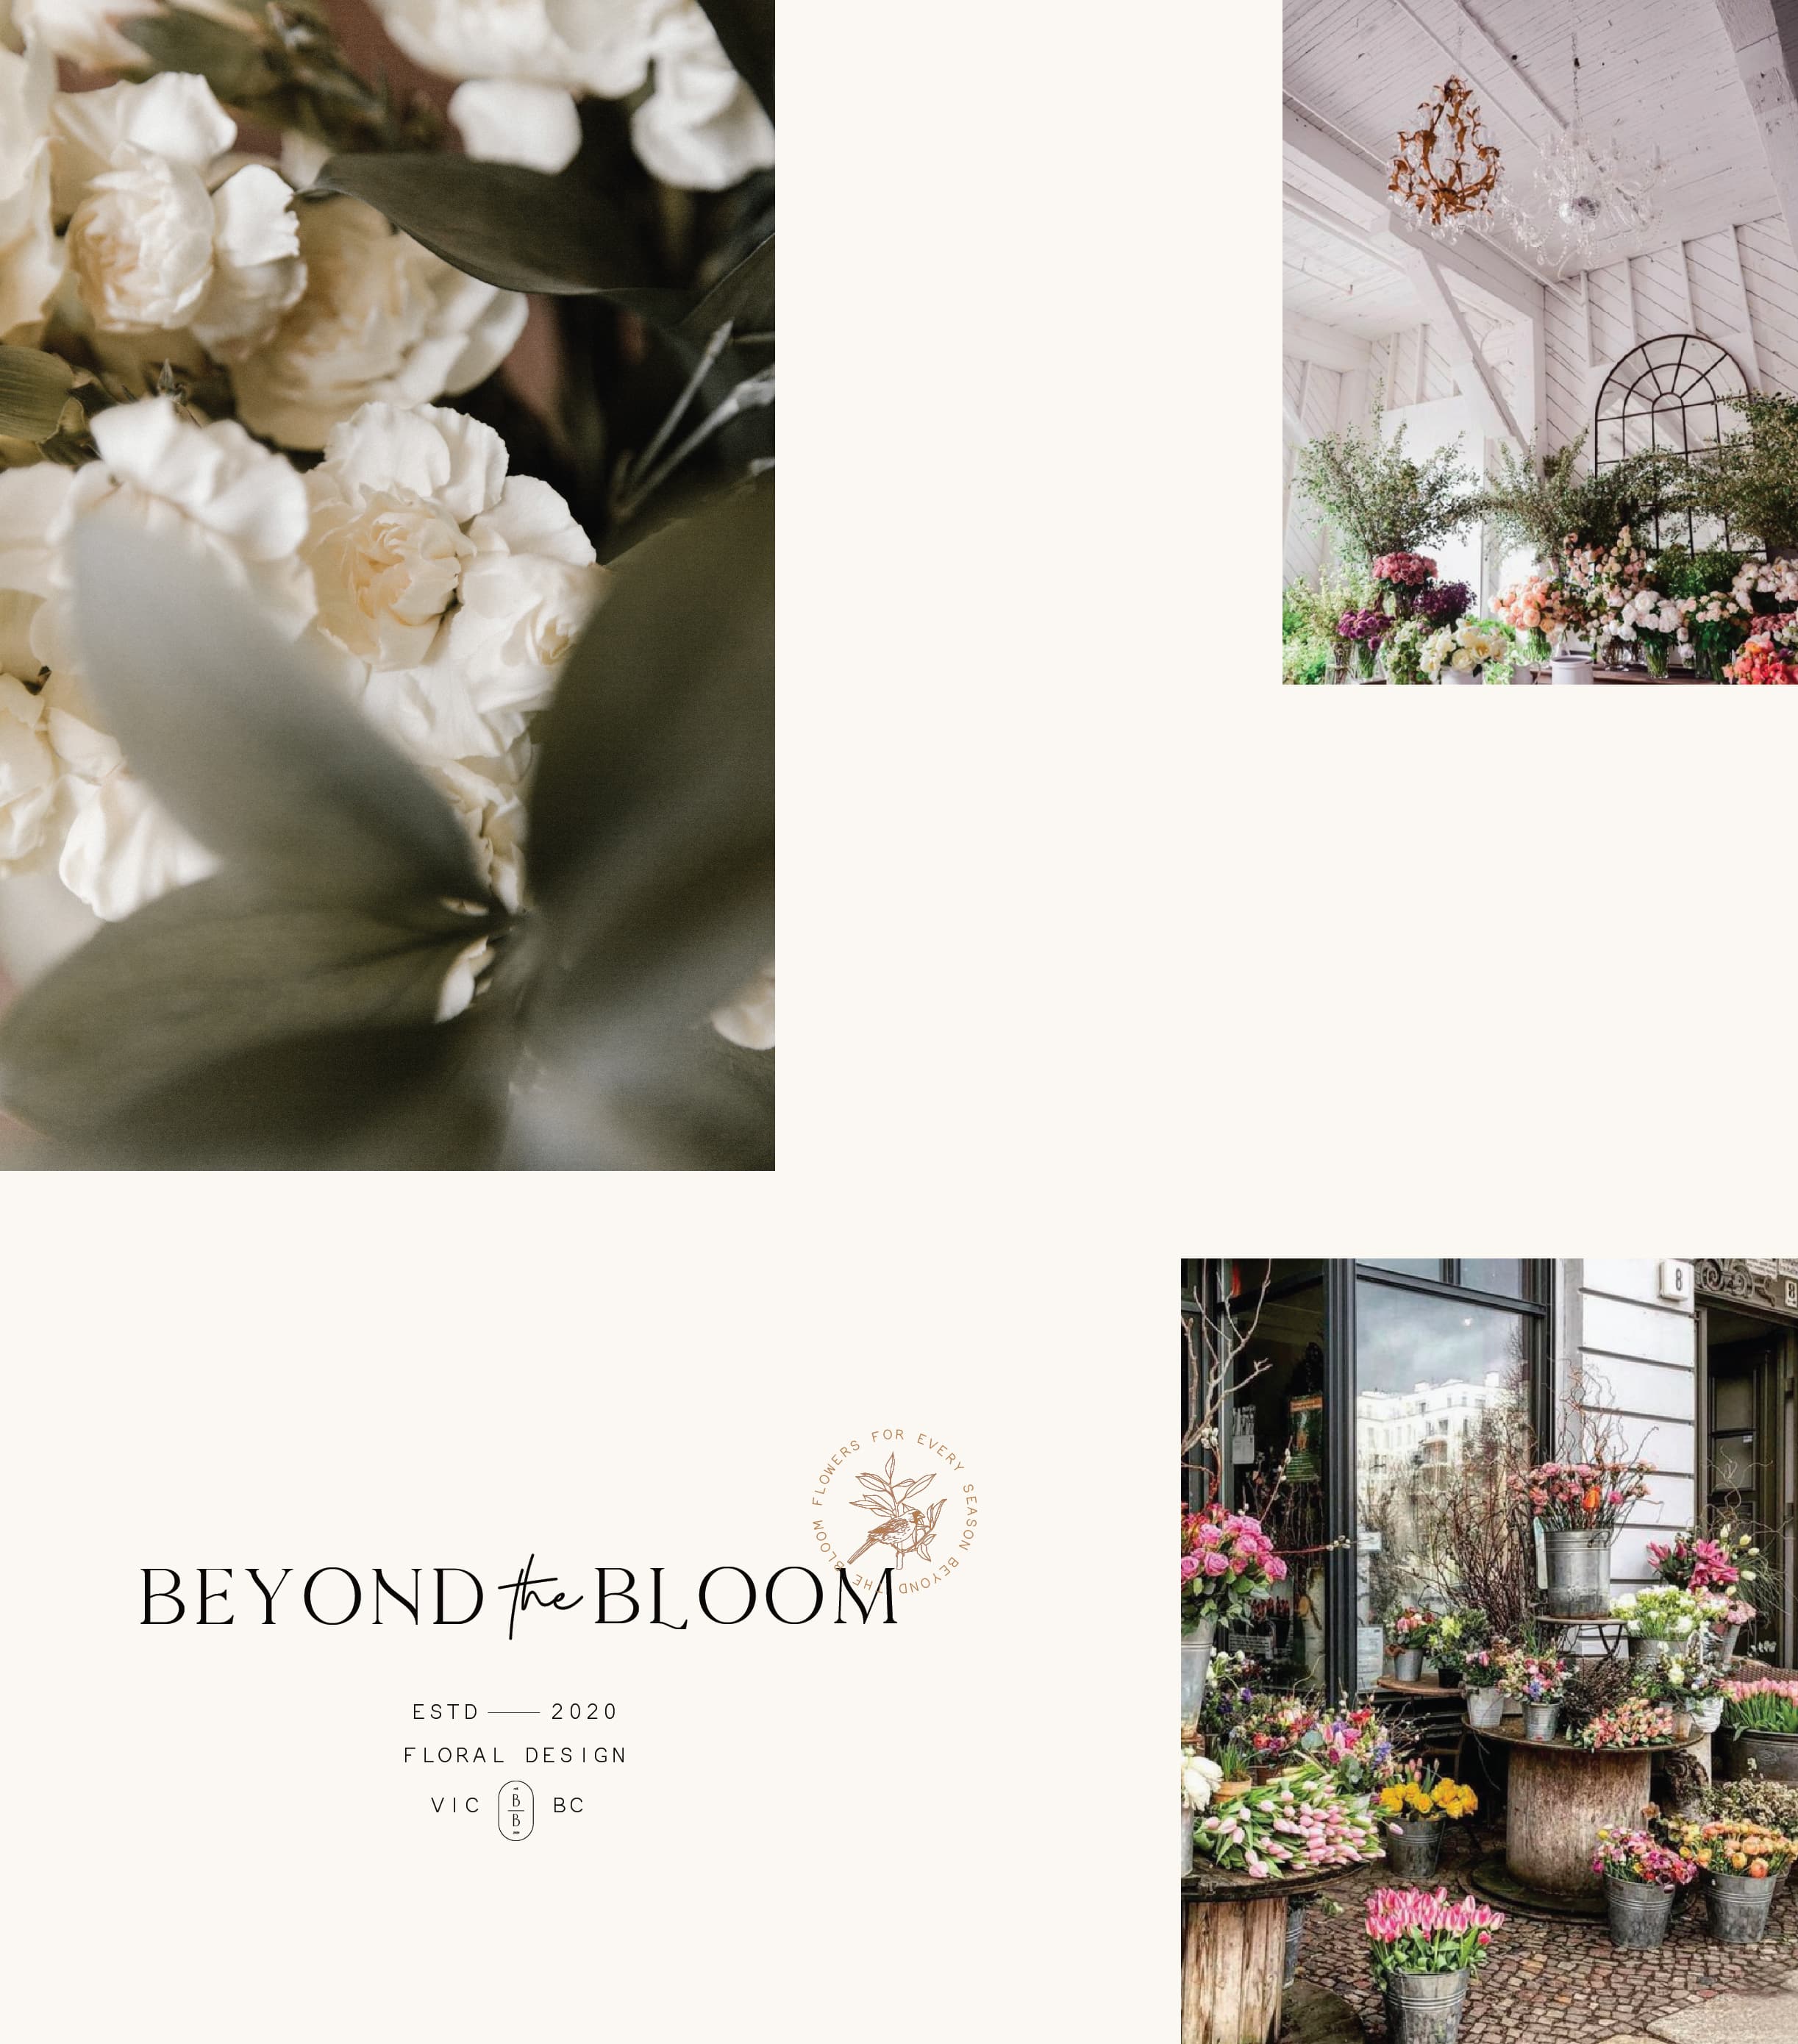 Beyong the bloom florist in victoria bc